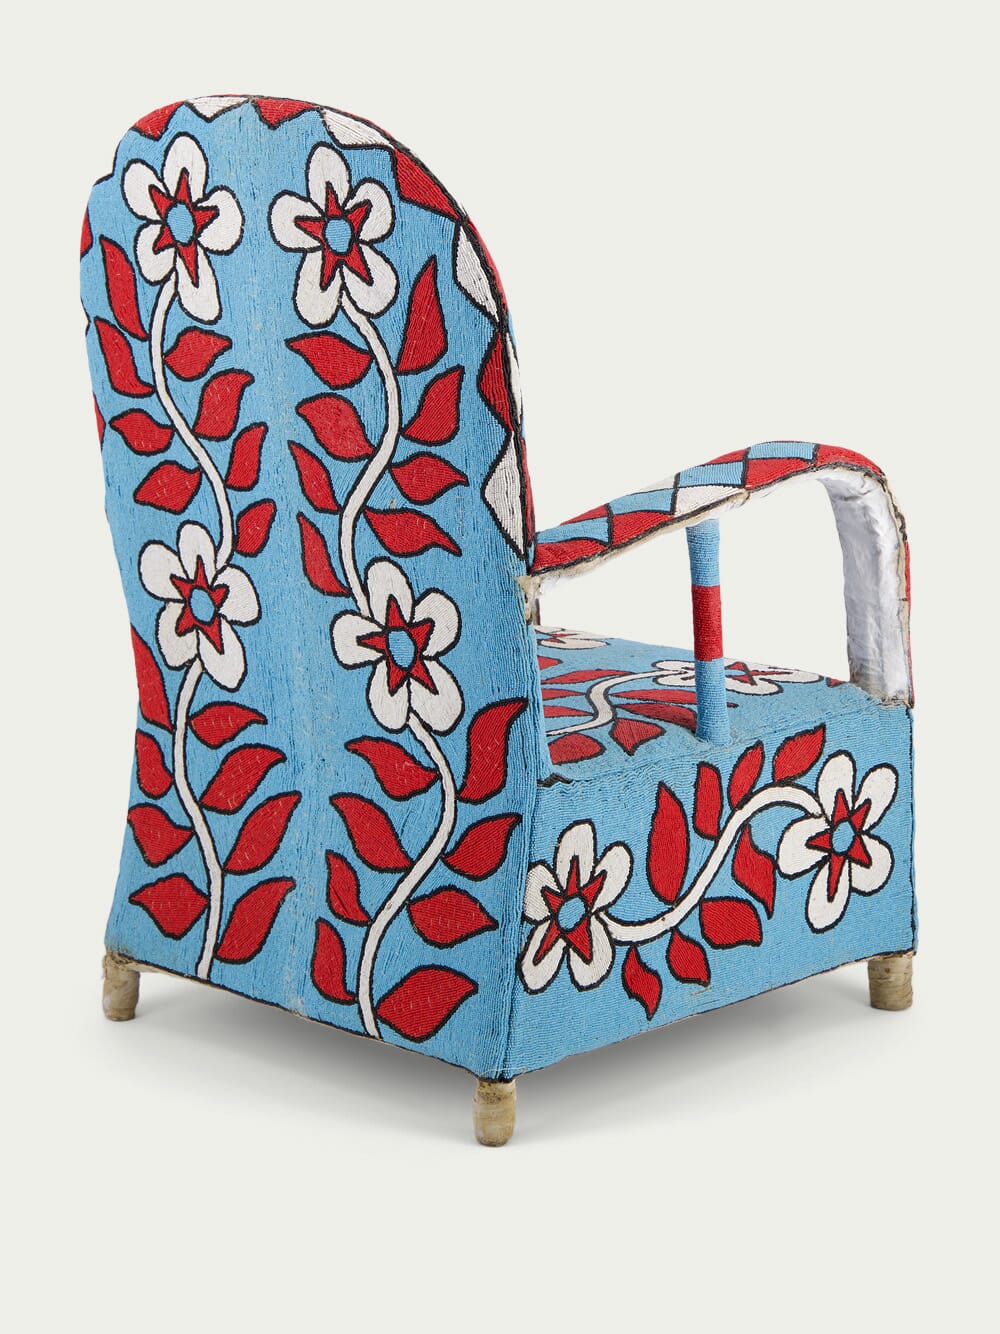 Fernando OteroRecycled Blue Beeds Armchair at Fashion Clinic